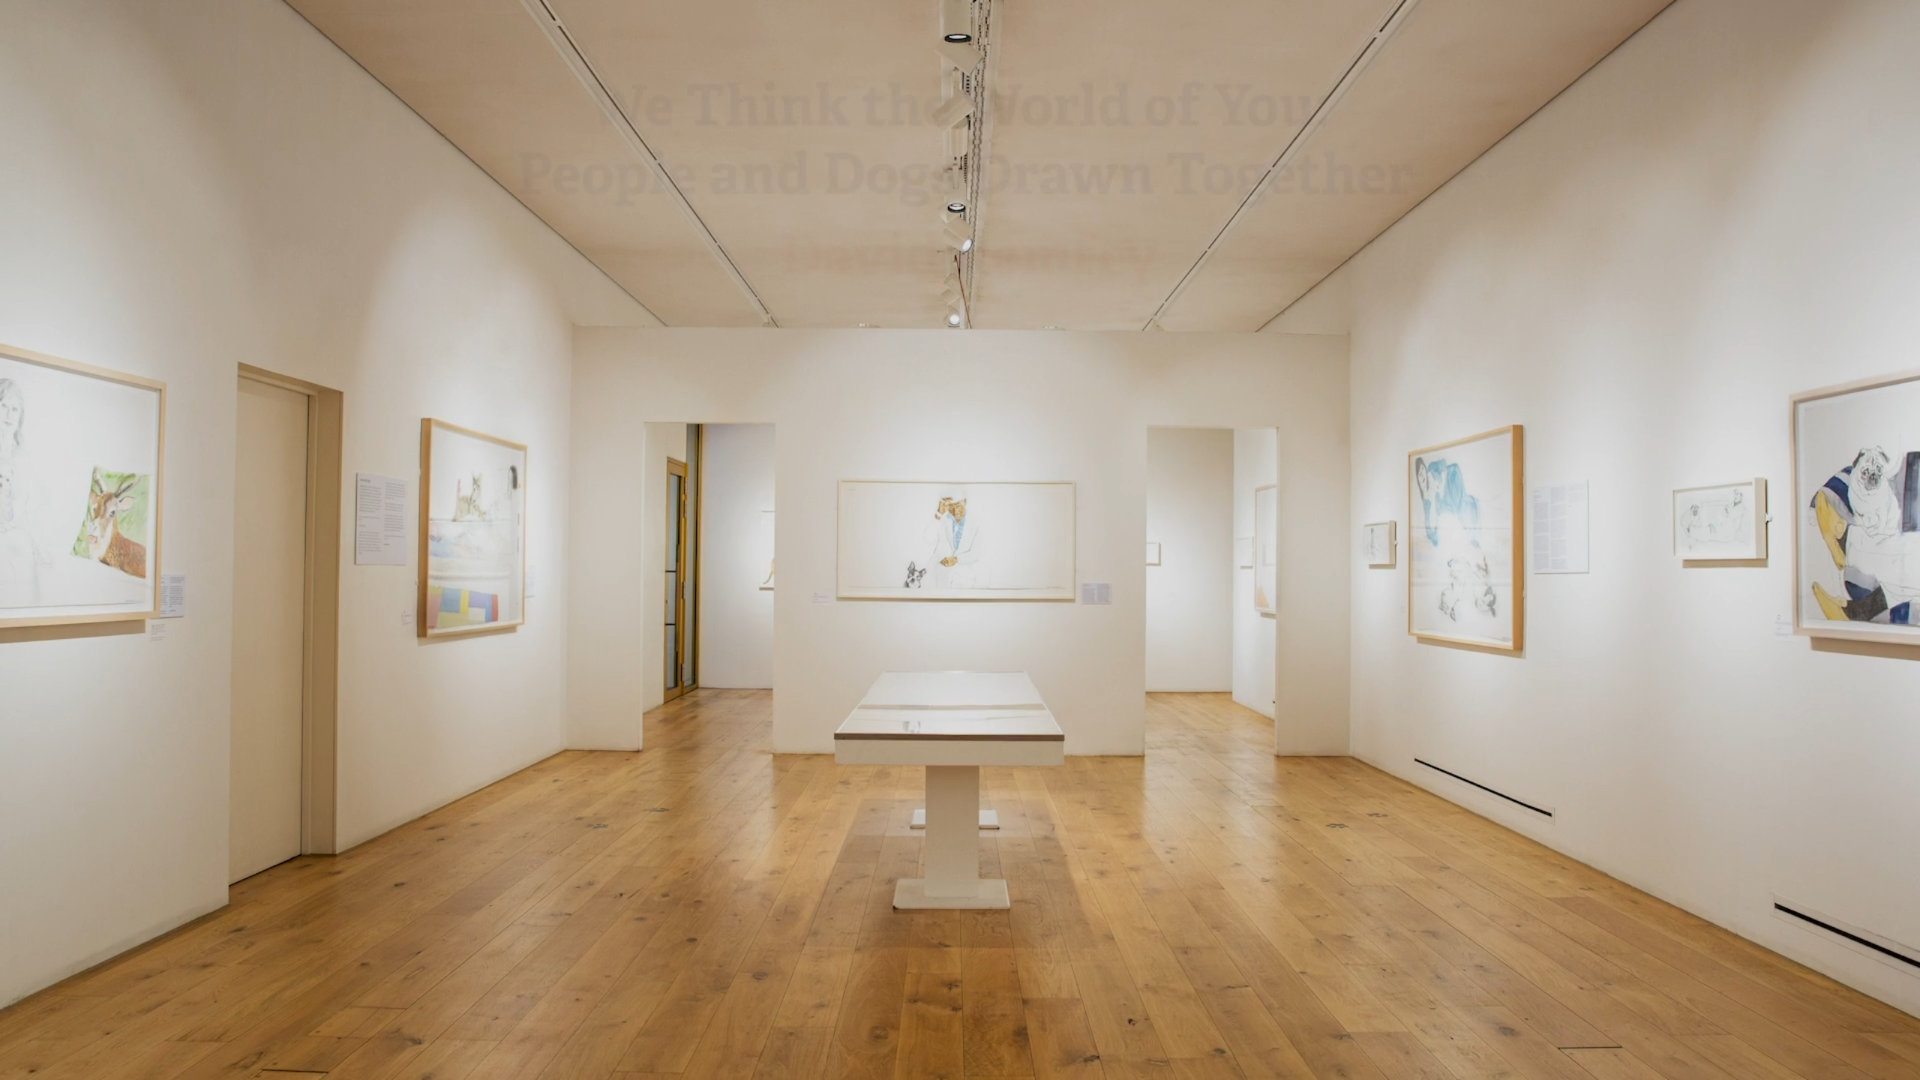 A view of a bright art gallery.